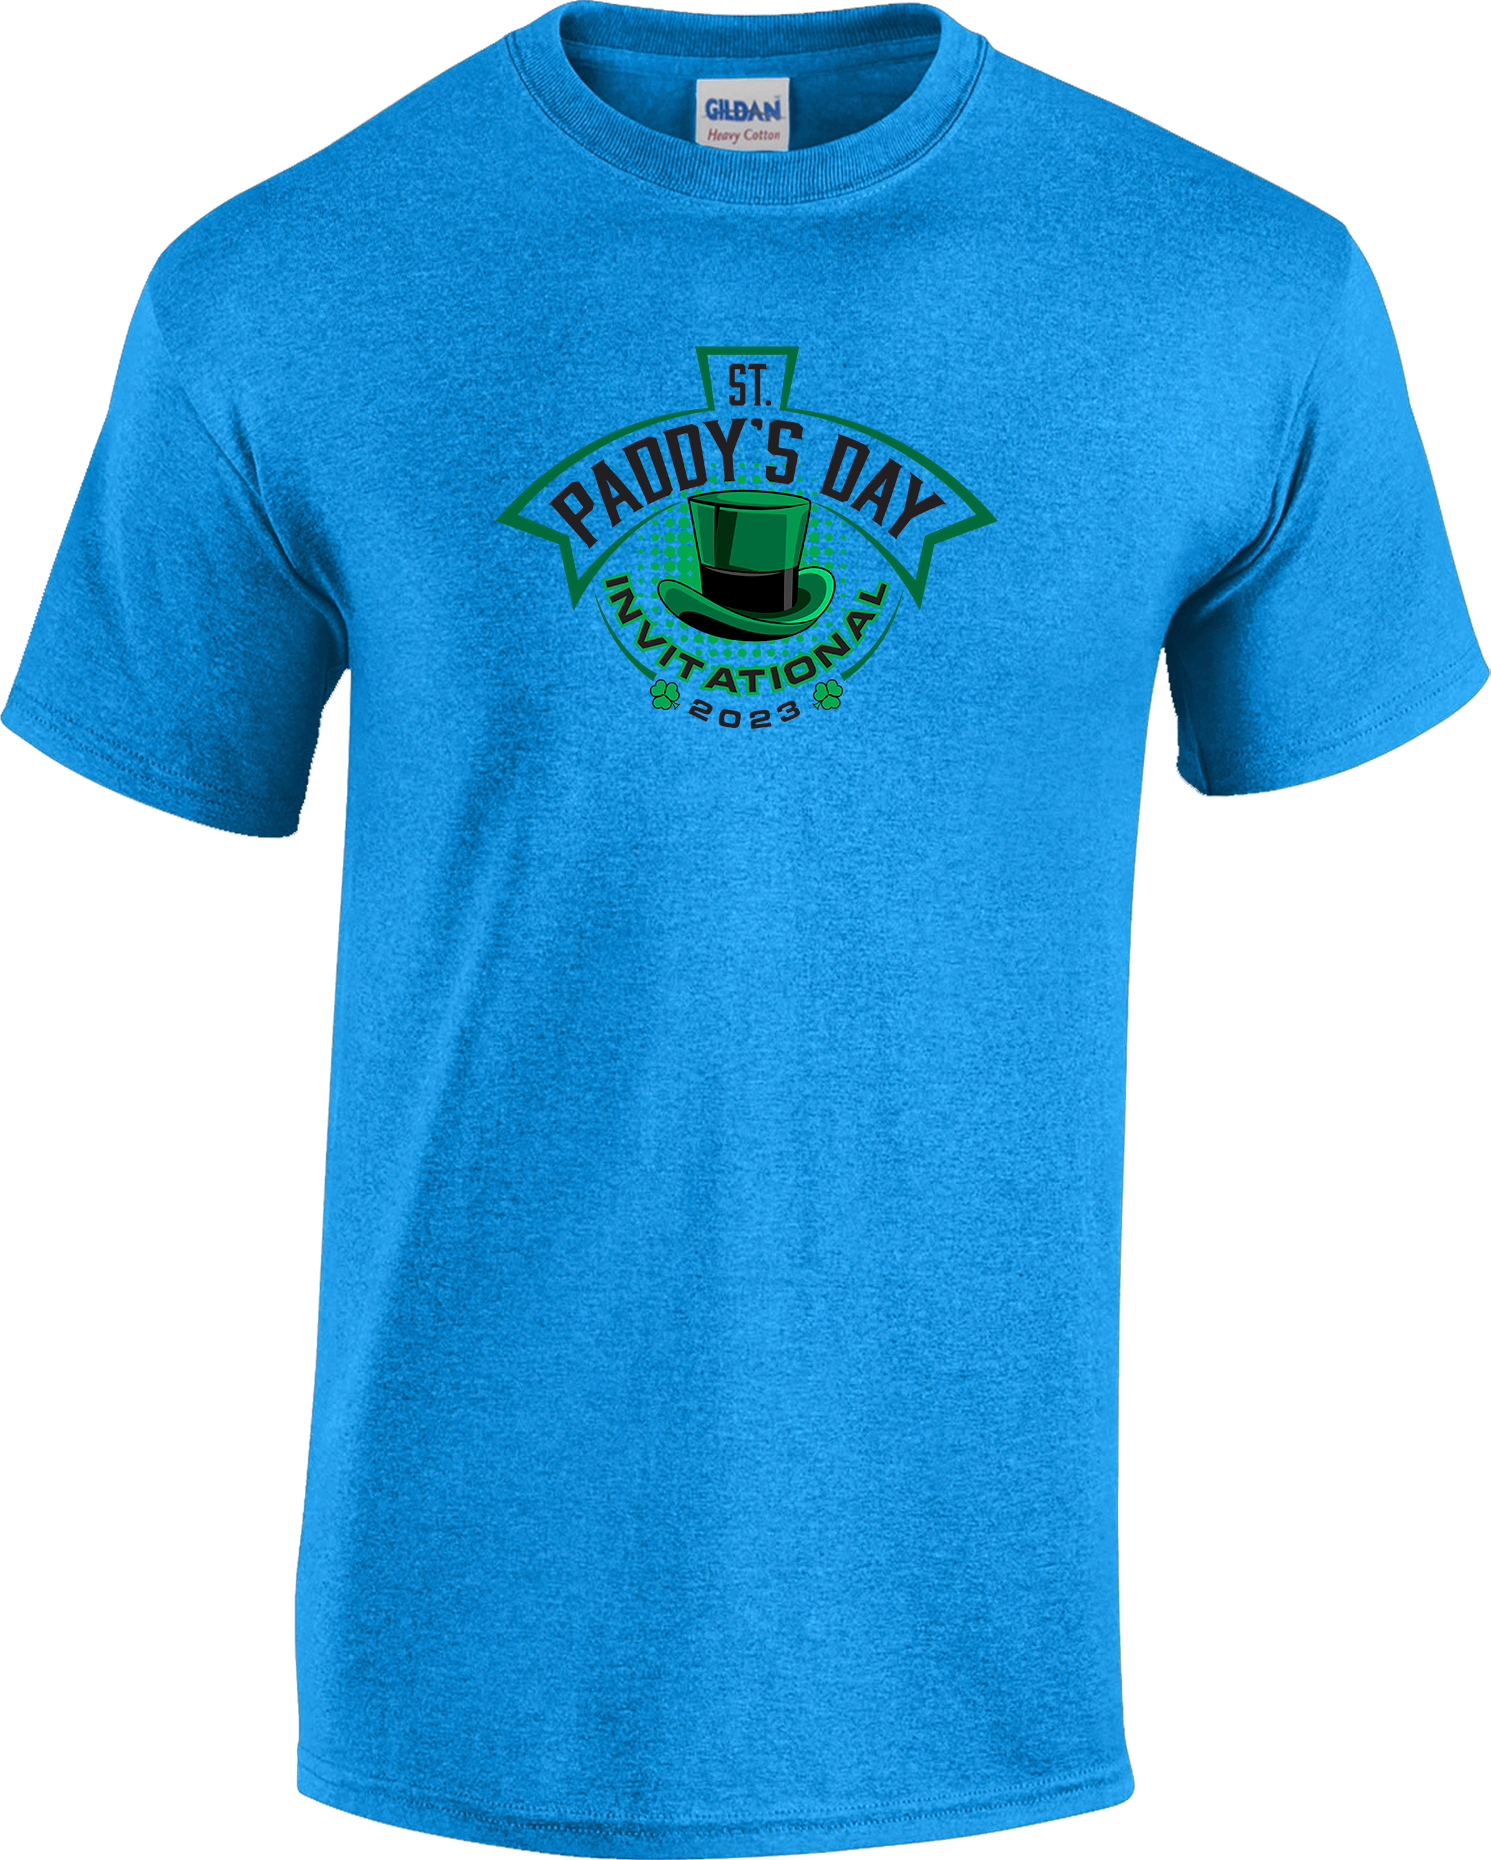 SHORT SLEEVES - 2023 St. Paddy's Day Invitational